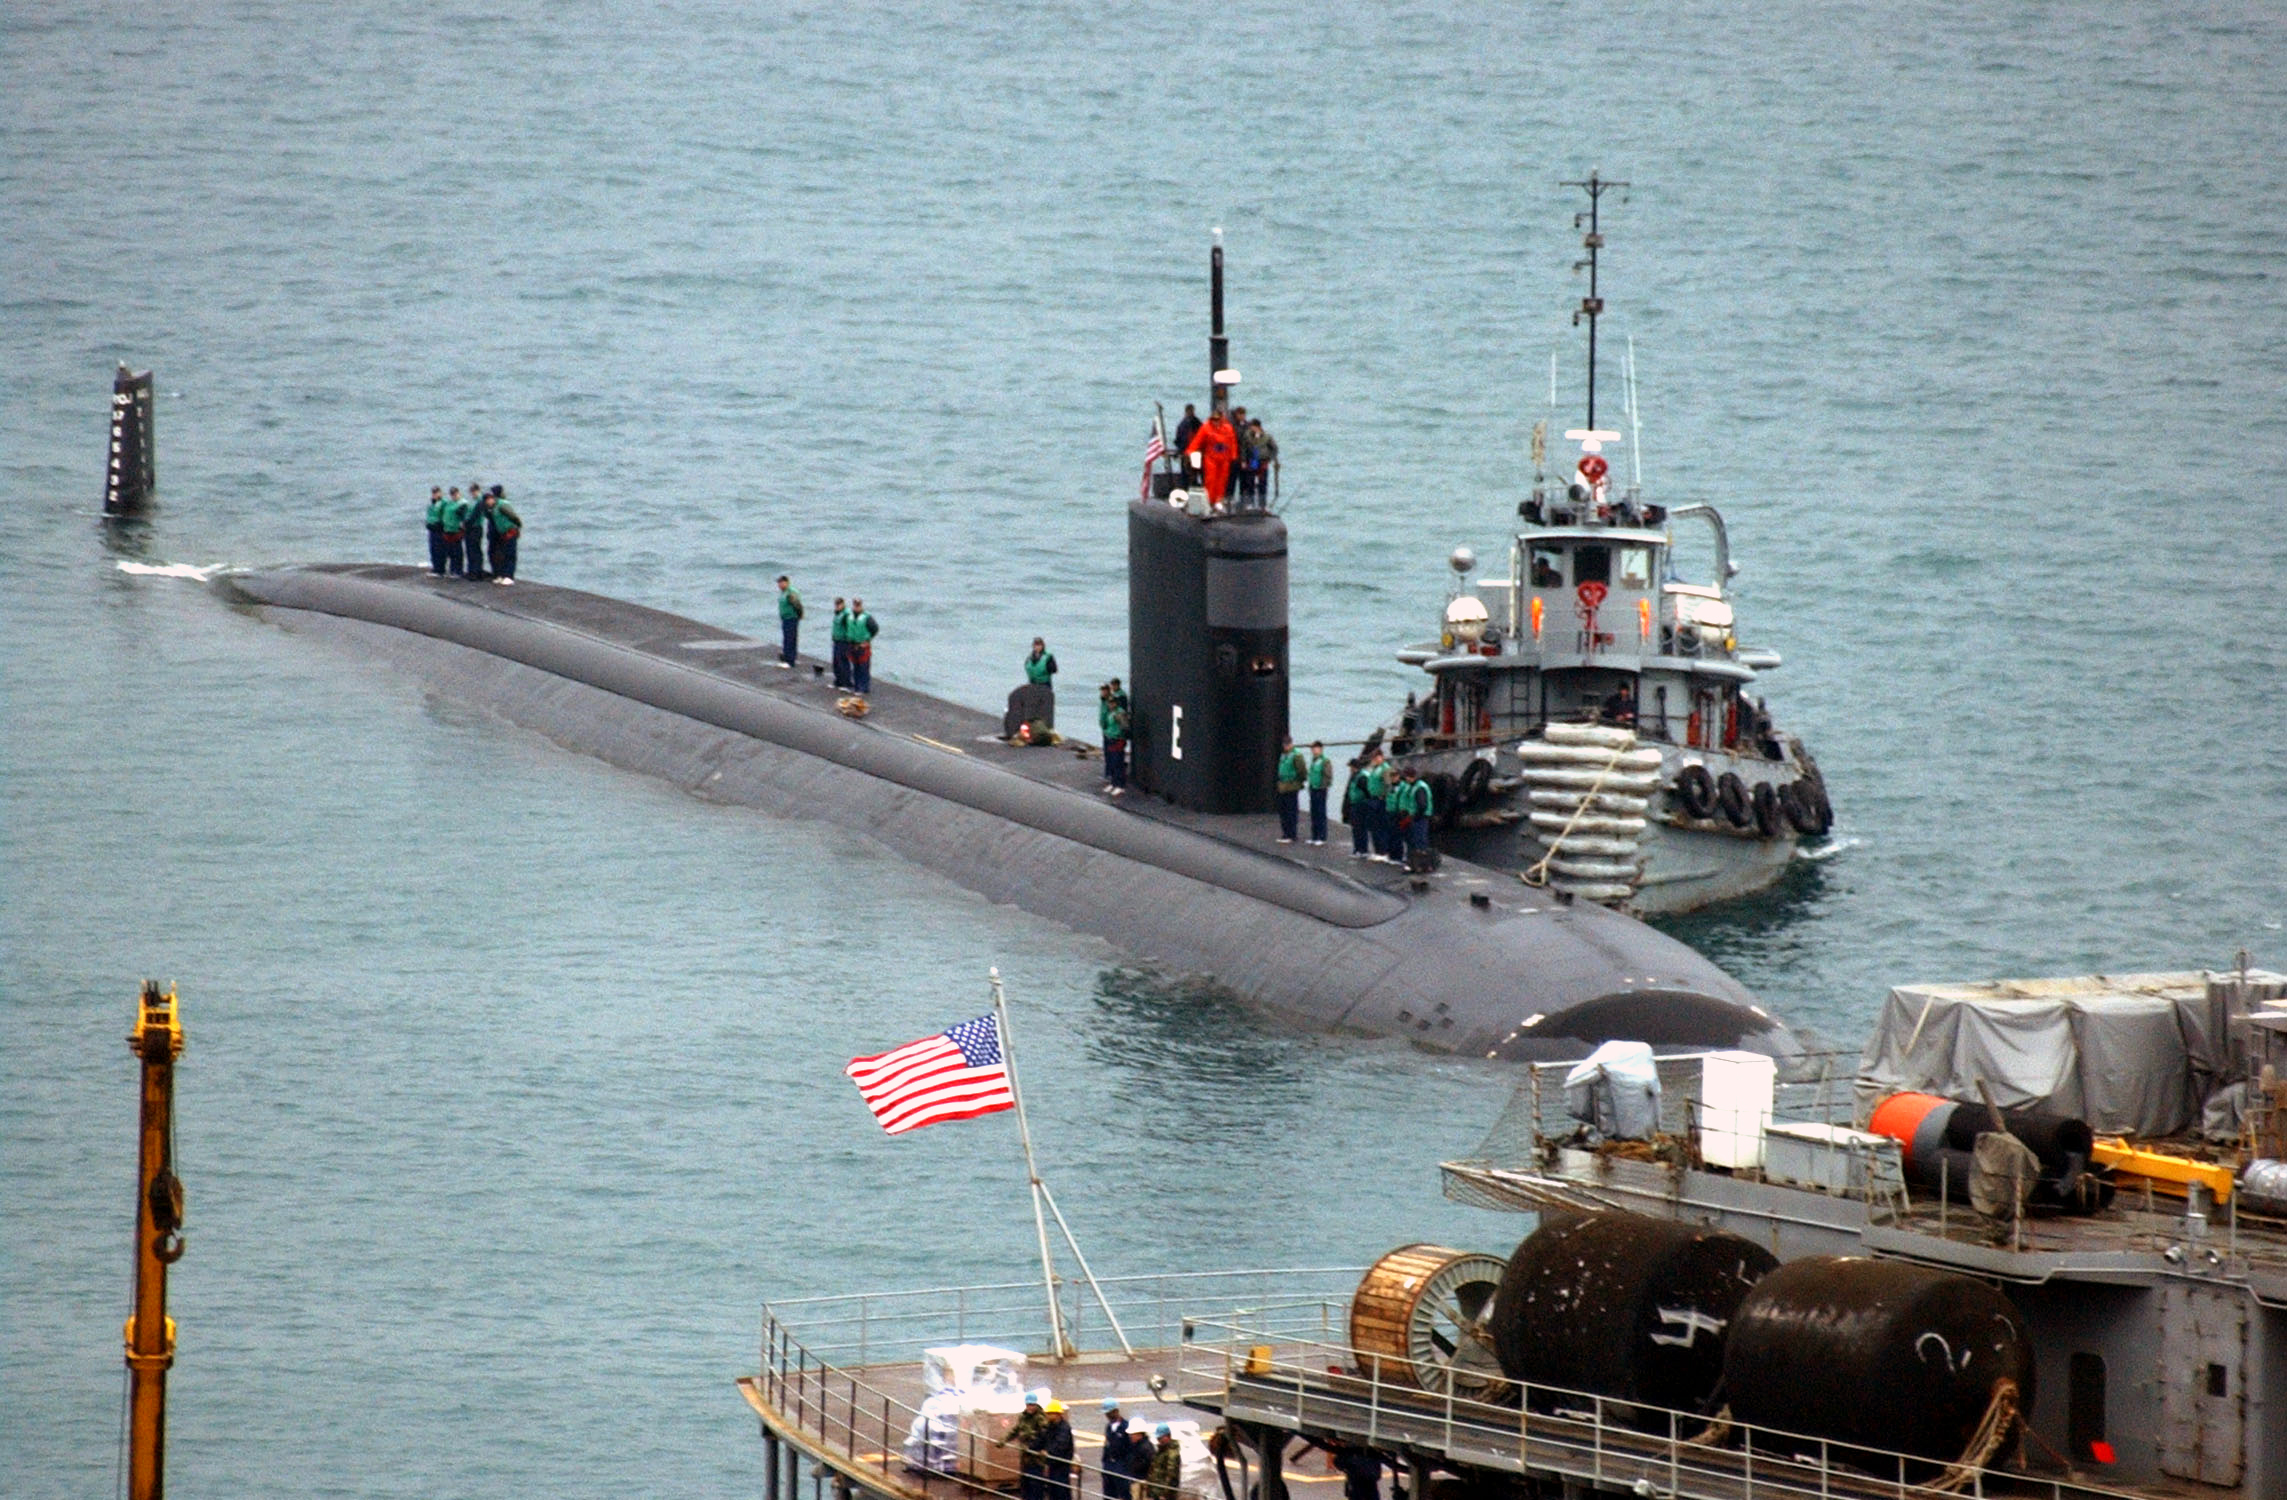 US_Navy_030221-N-0780F-020_Los_Angeles_class_submarine_USS_San_Juan_arrives_for_a_port_visit_and_prepares_to_be_berthed_next_to_submarine_tender_USS_Emory_S._Land.jpg